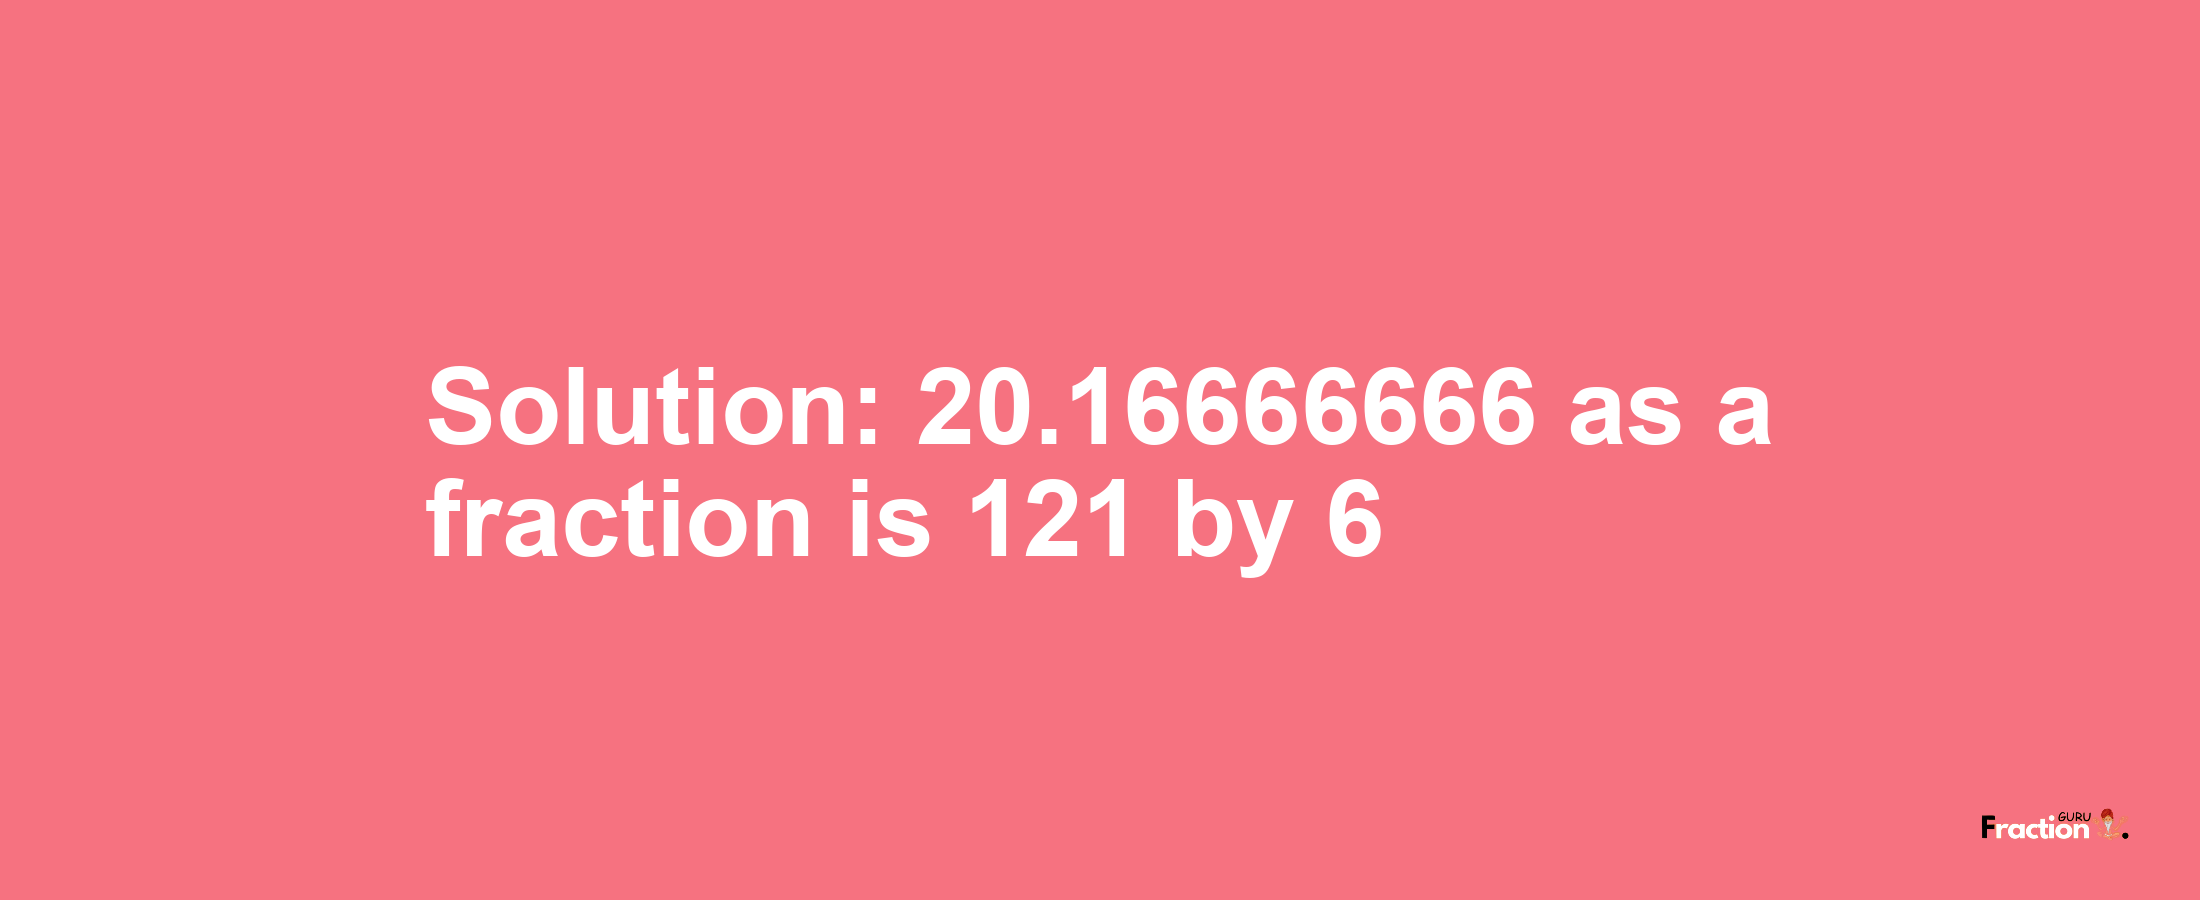 Solution:20.16666666 as a fraction is 121/6